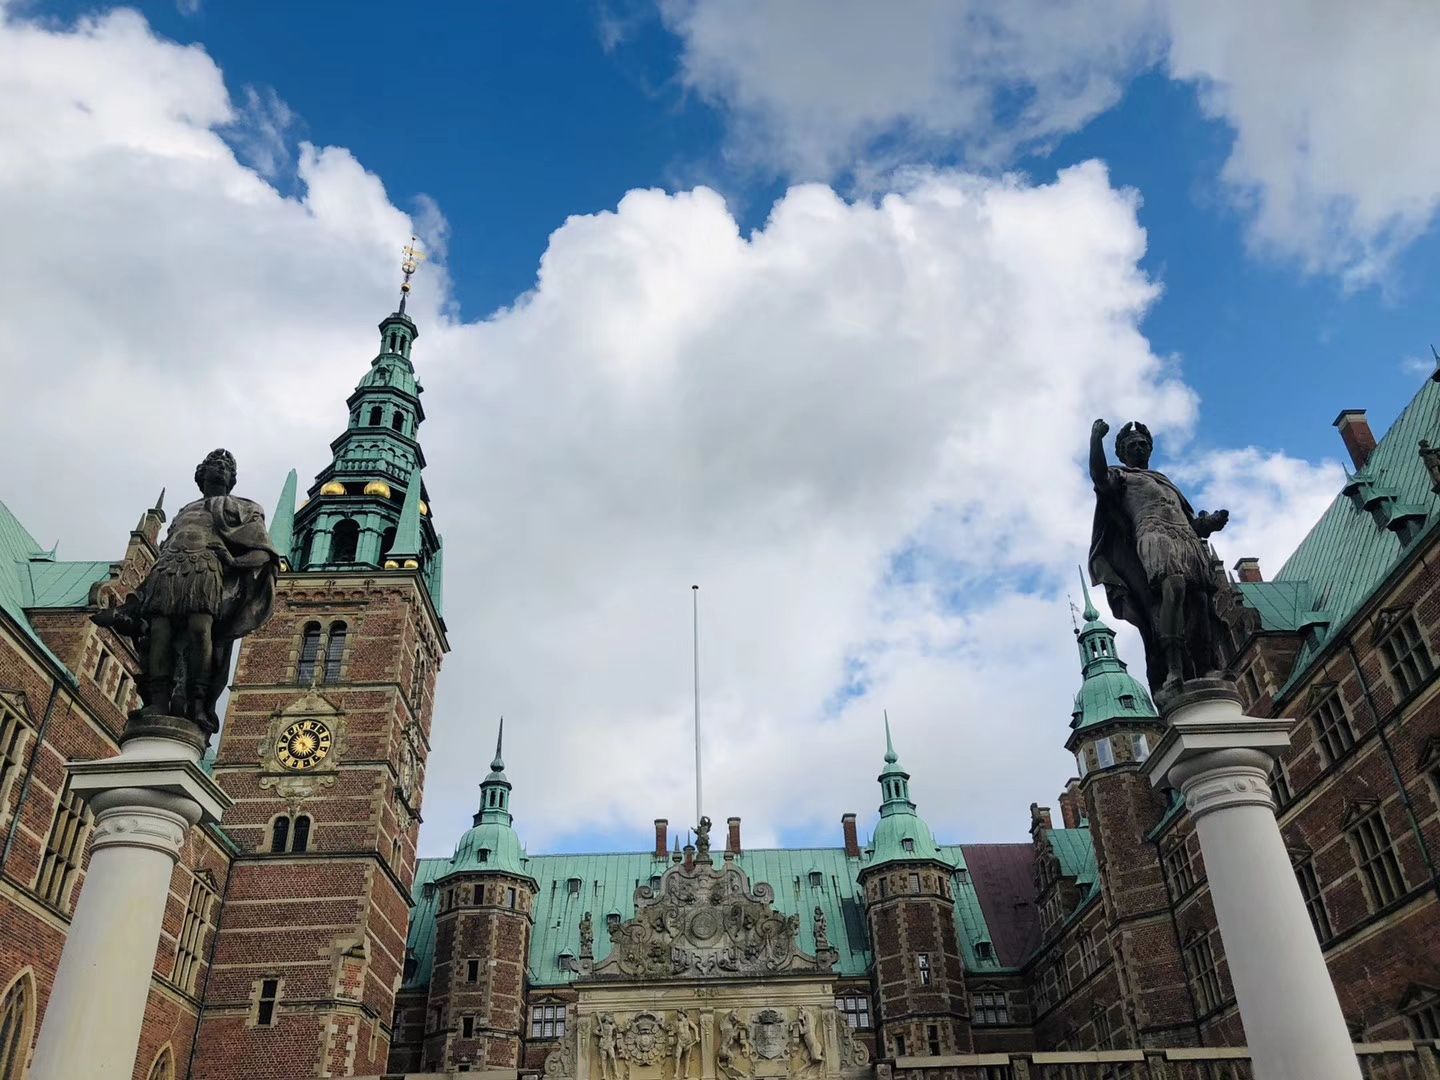 Frederiksborg Castle attraction reviews - Frederiksborg Castle tickets -  Frederiksborg Castle discounts - Frederiksborg Castle transportation,  address, opening hours - attractions, hotels, and food near Frederiksborg  Castle - Trip.com